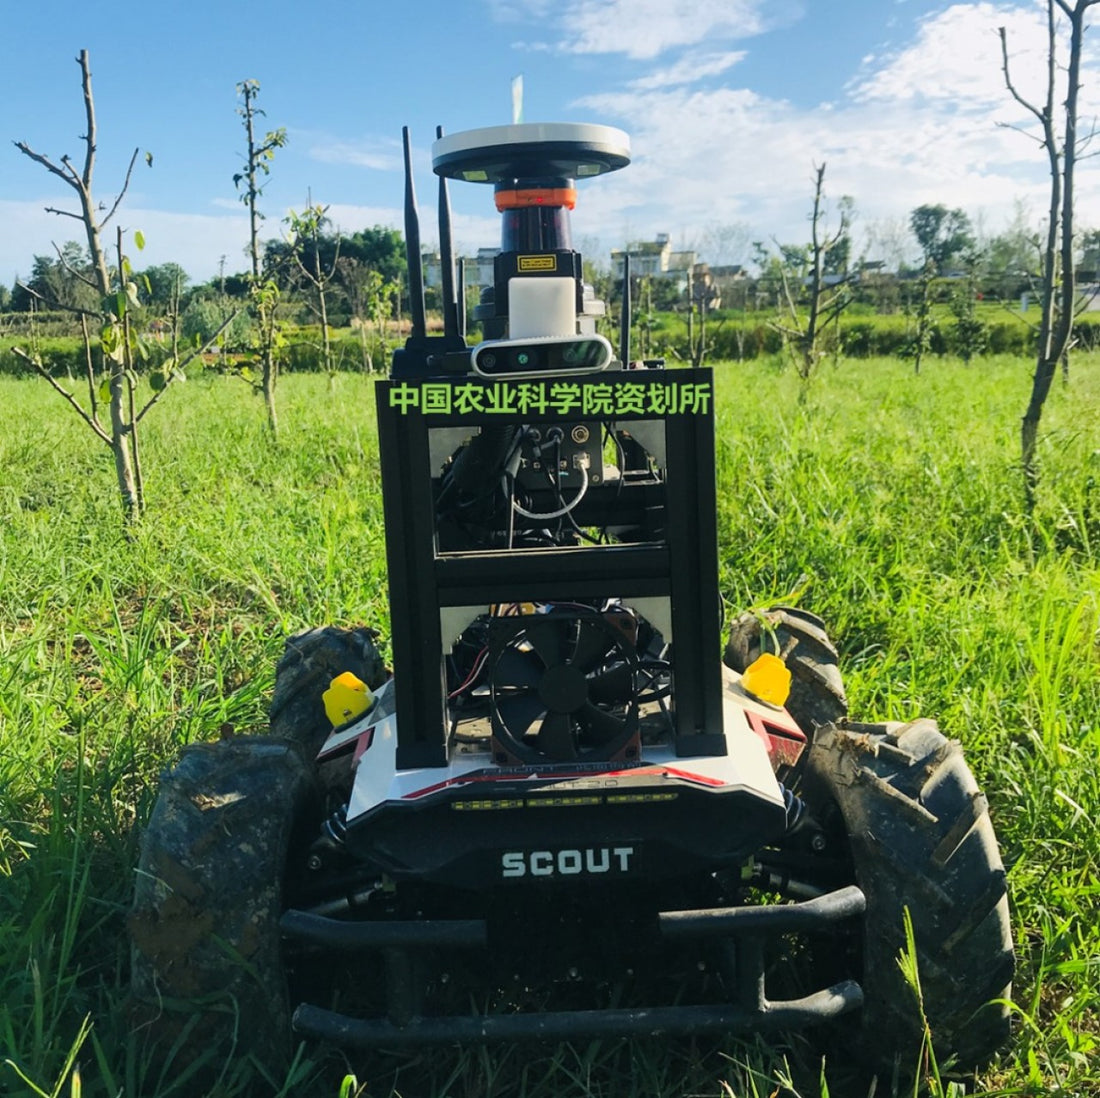 Little Sowing- An agriculture Robot made by the Chinese Academy of Agricultural